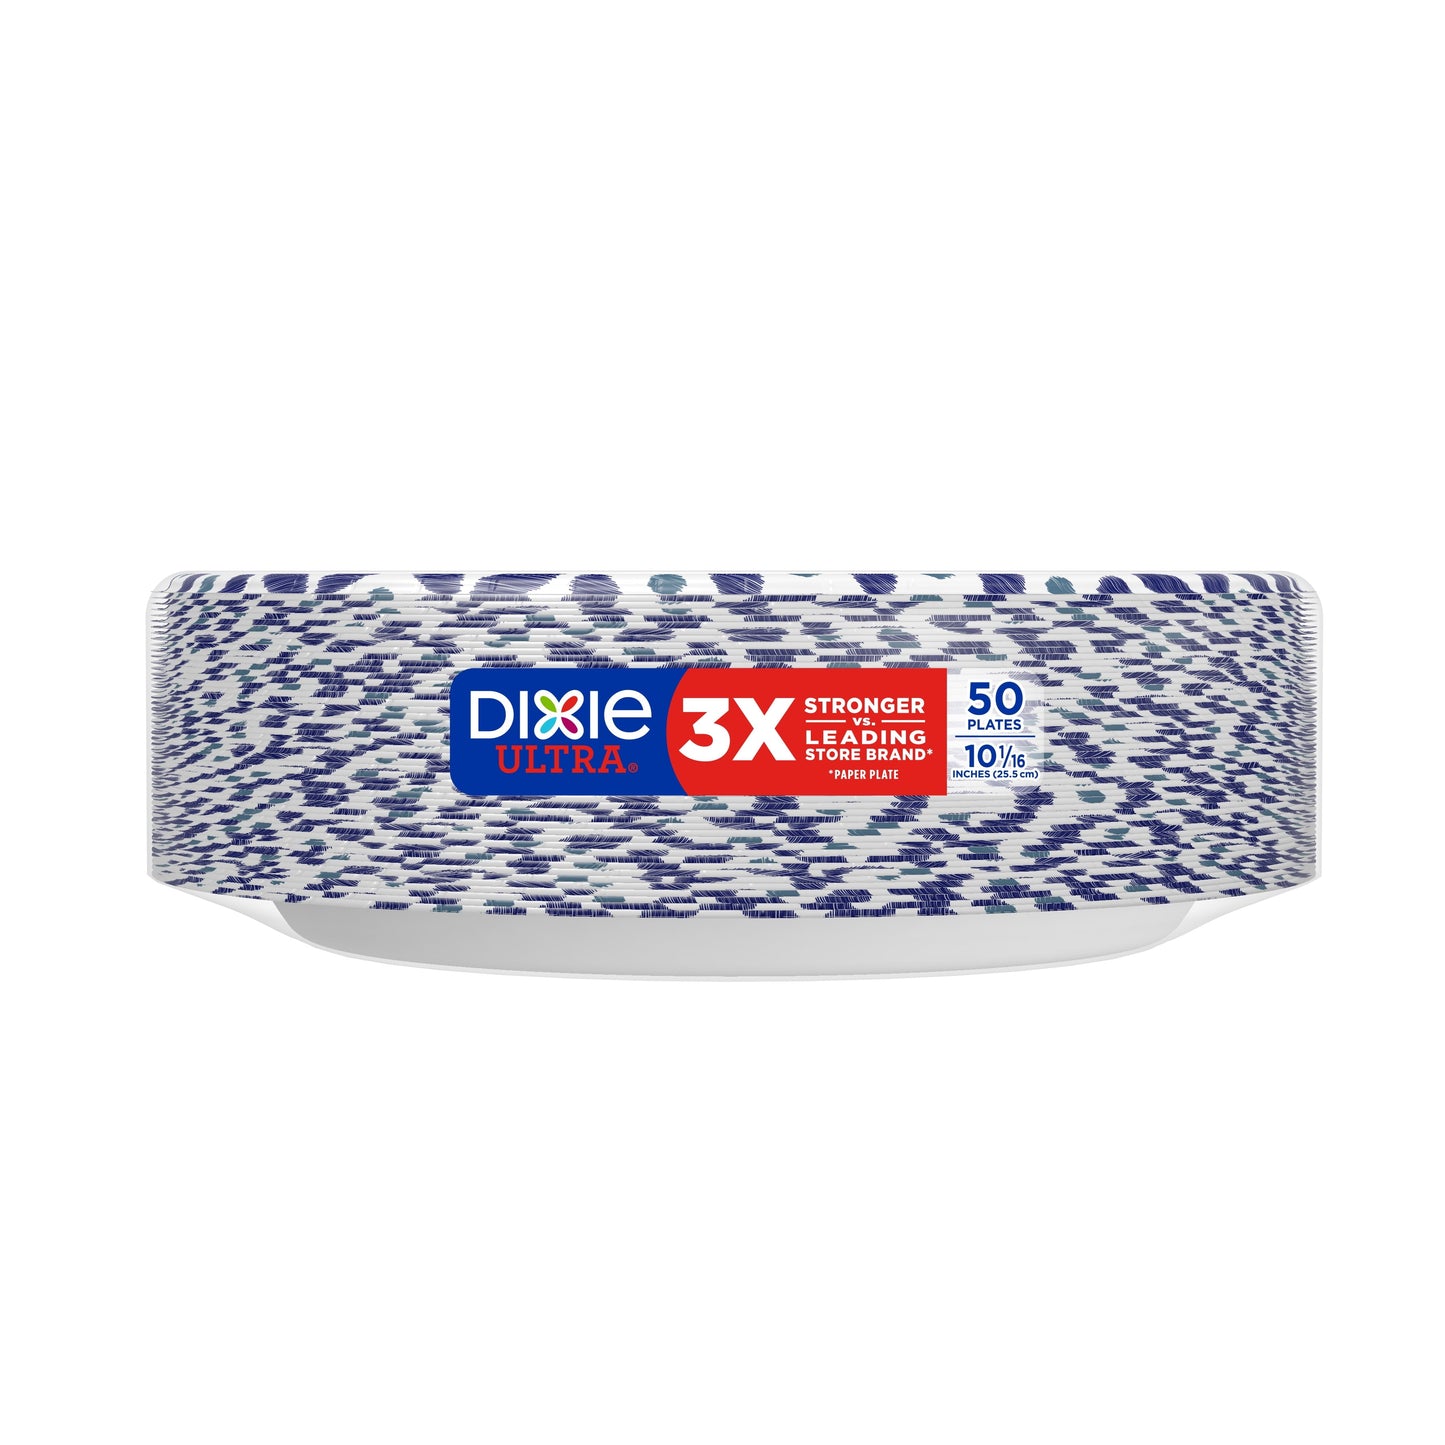 Dixie Ultra Disposable Paper Plates, Multicolor, 10 in, 50 Count